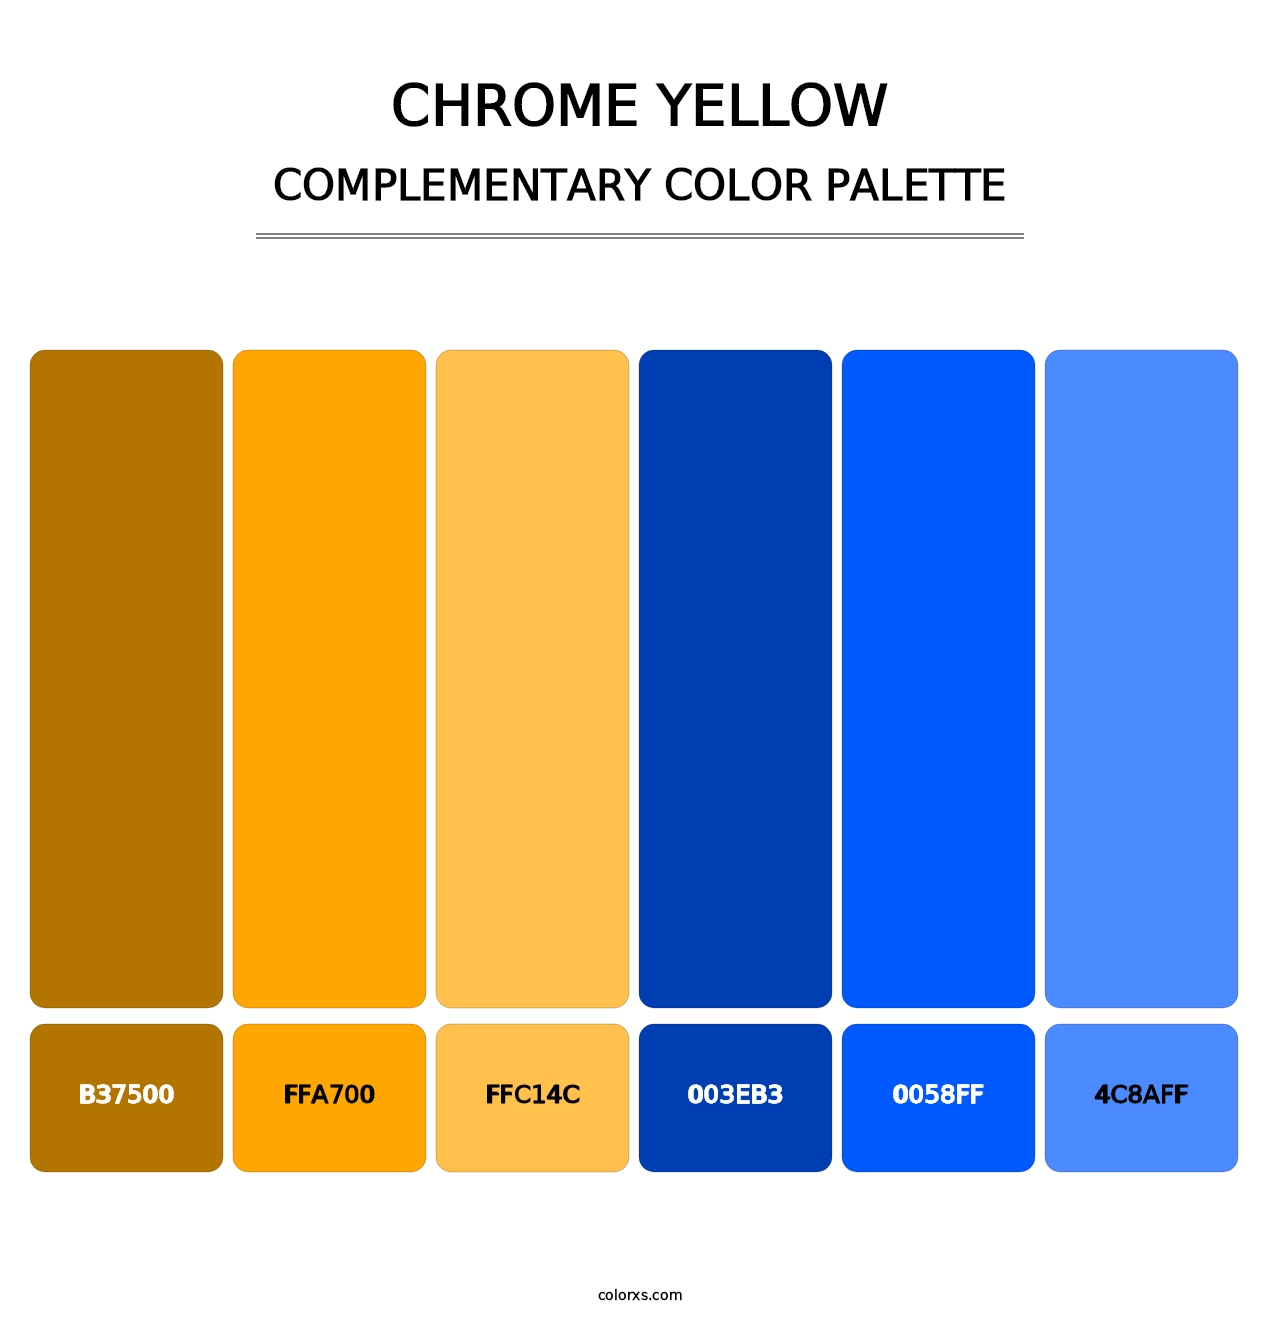 Chrome Yellow - Complementary Color Palette